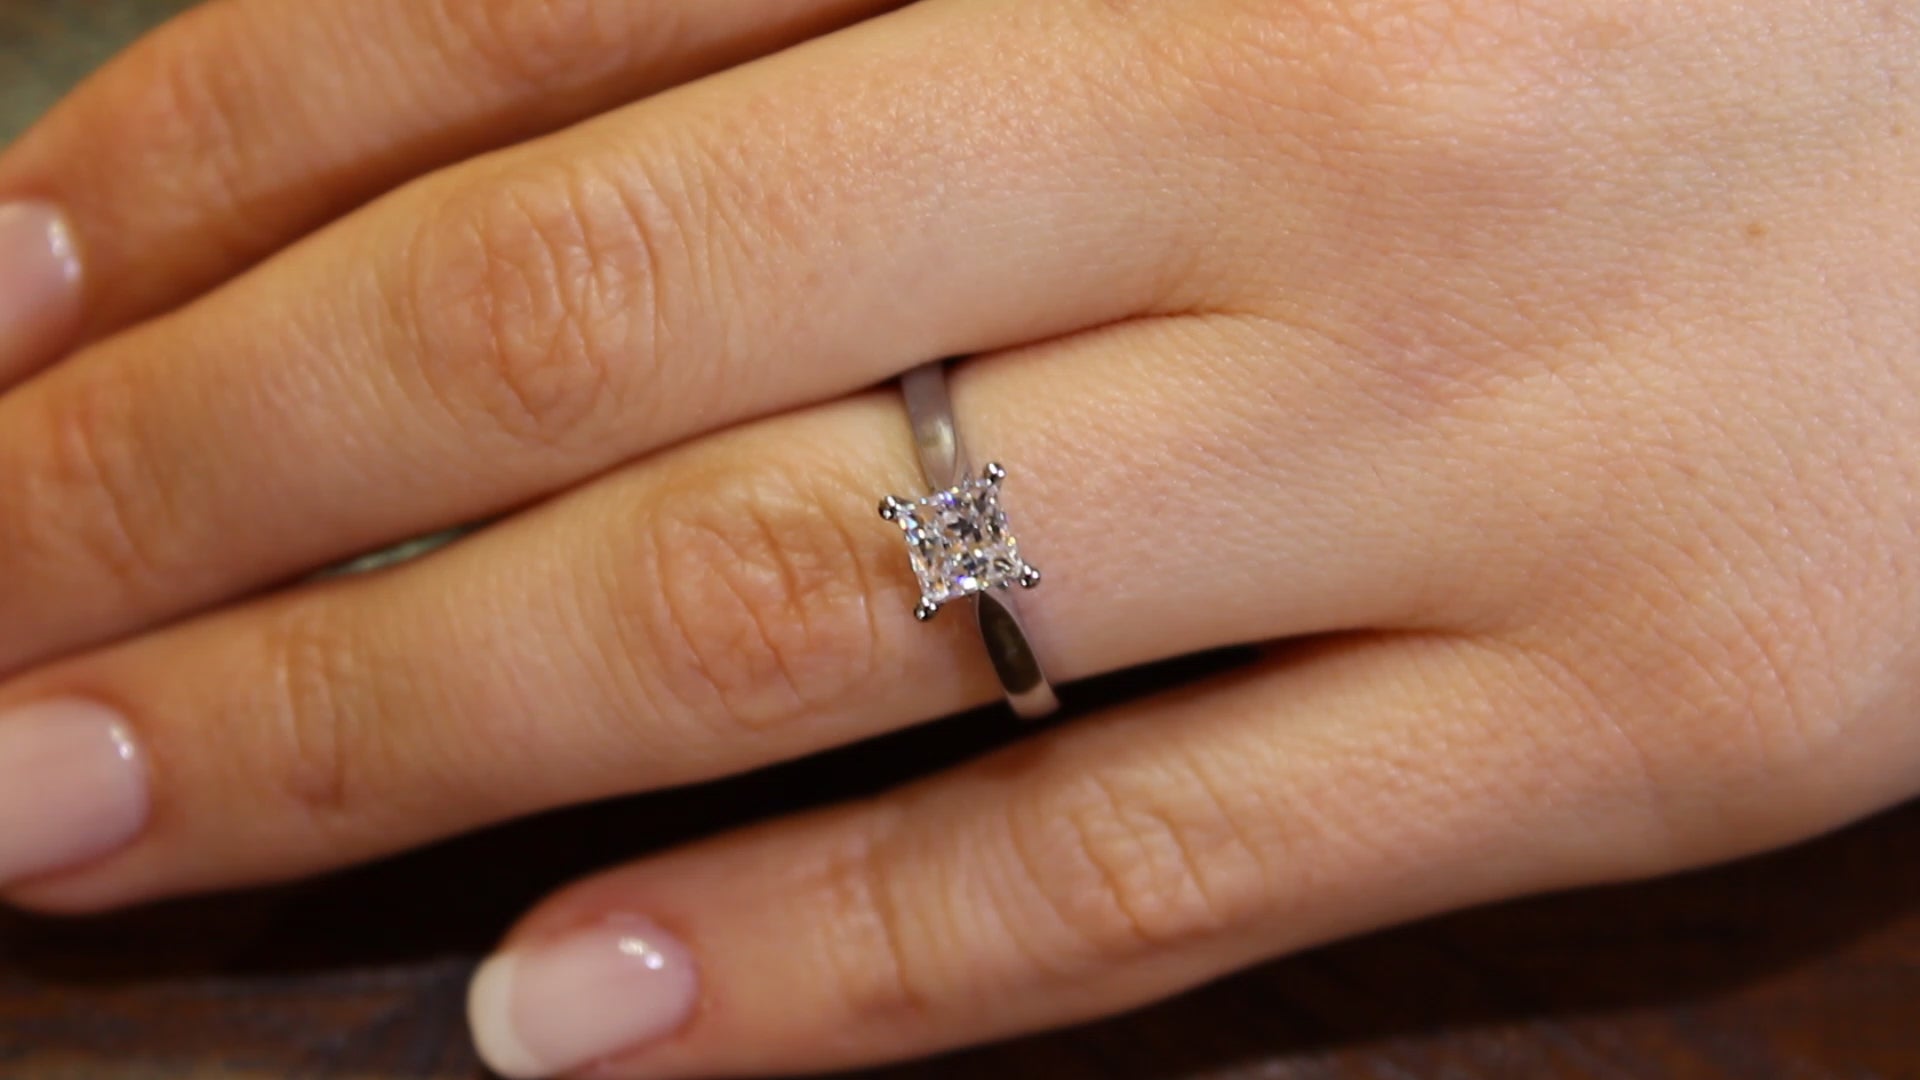 Princess Cut Diamond Ring in white gold on a womans ring finger